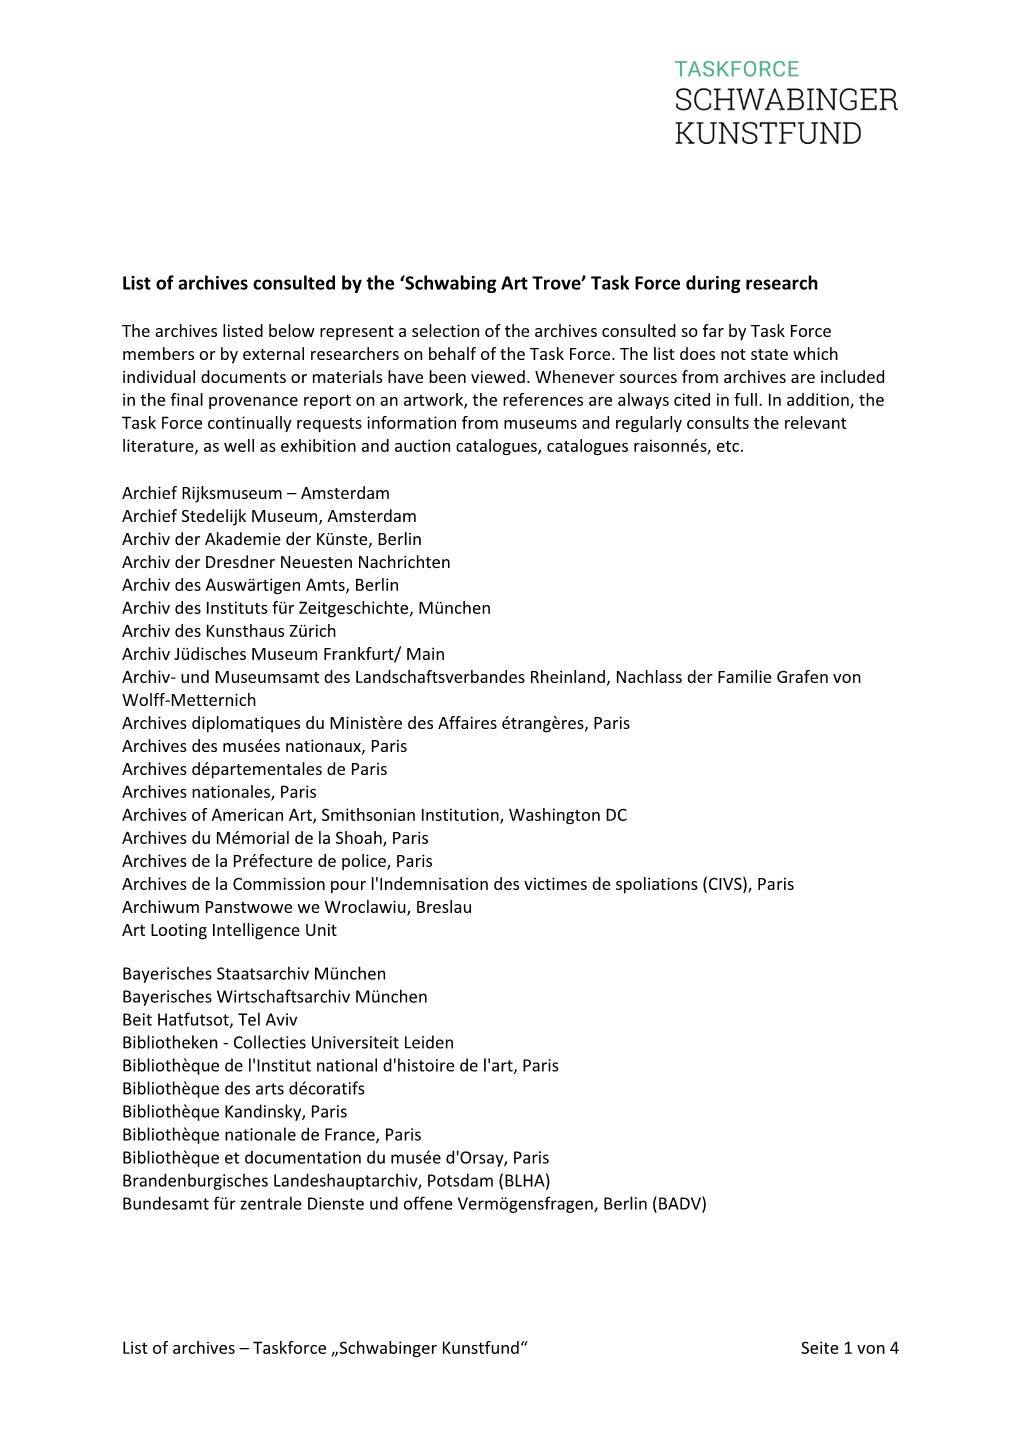 List of Archives Consulted by the ‘Schwabing Art Trove’ Task Force During Research